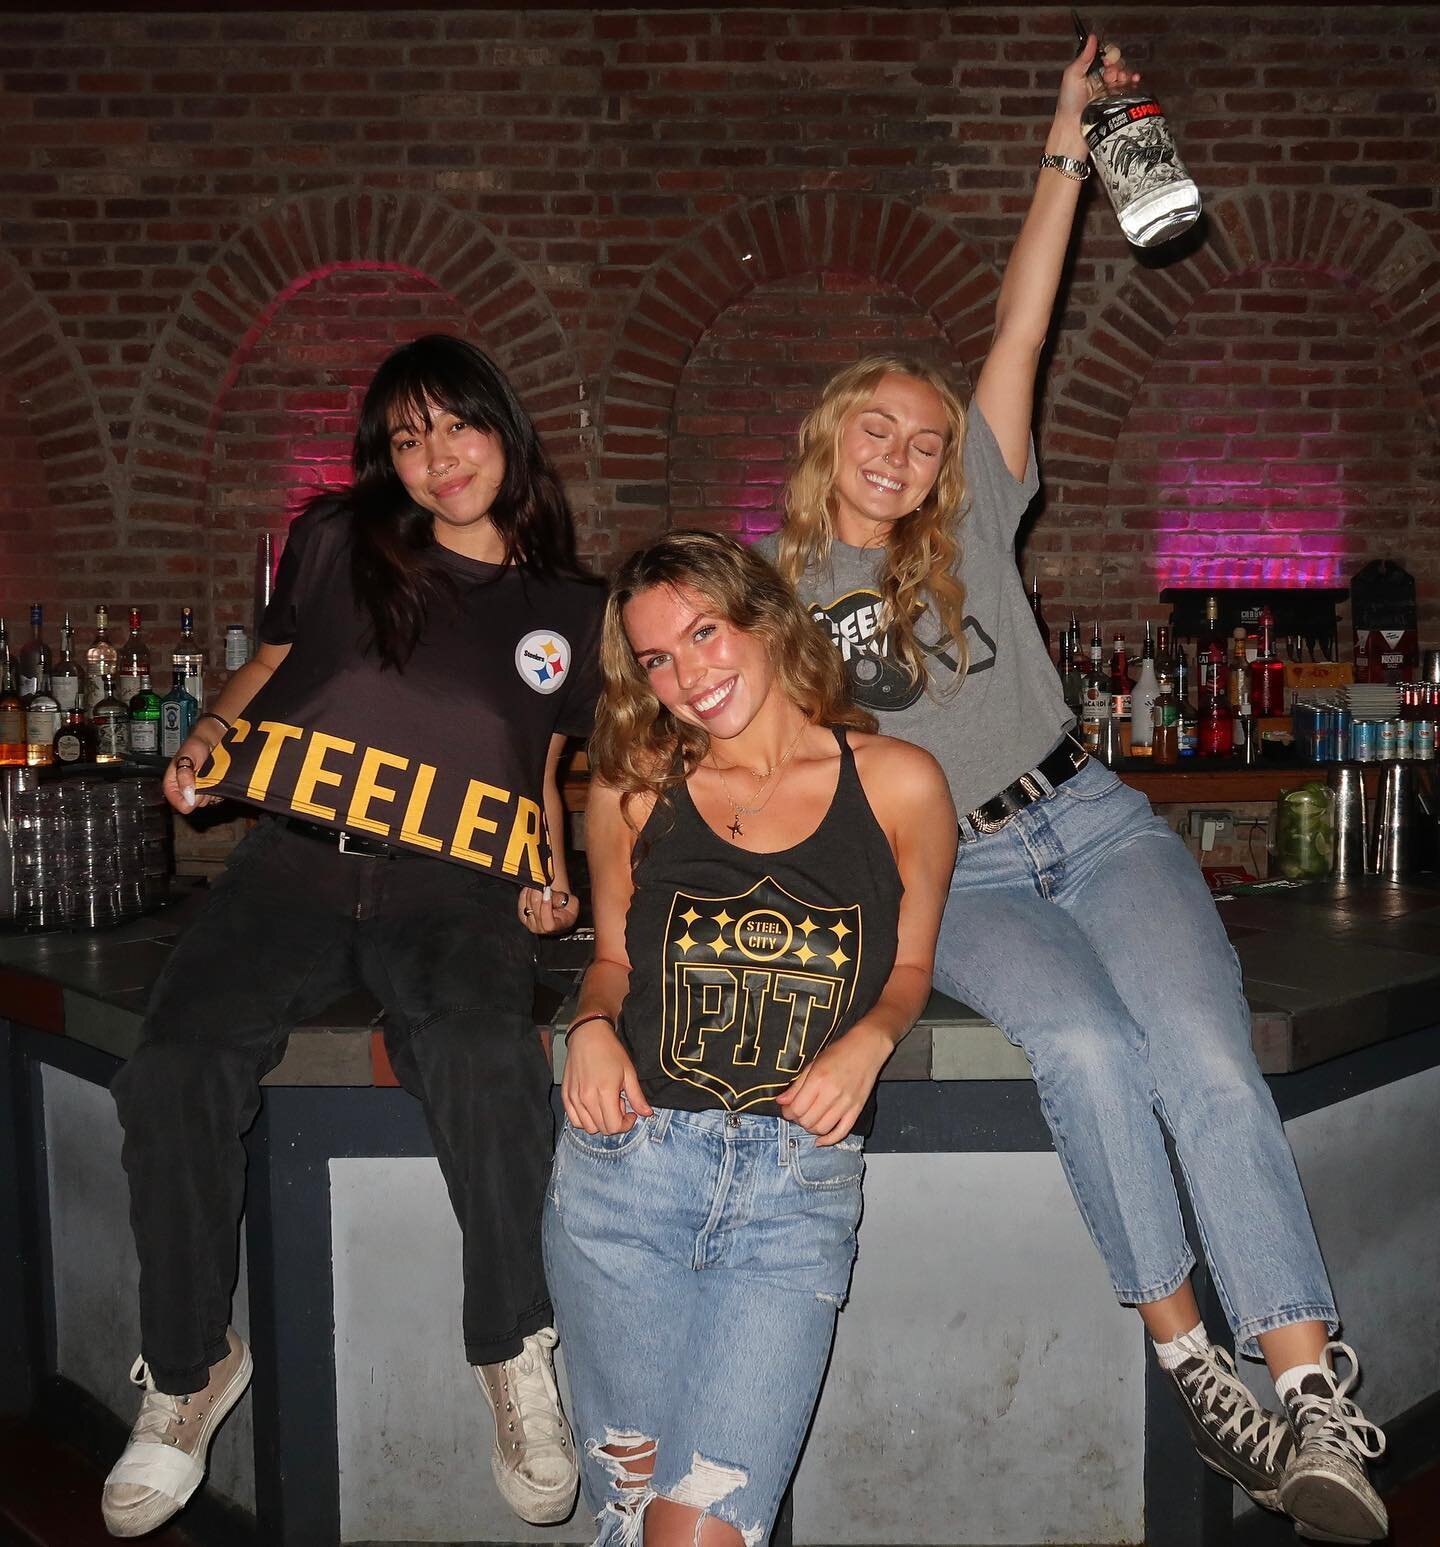 Calling all Steelers fans!🚨 GAMEDAY SPECIALS- $5 Miller &amp; Bud, $7 House Marg, $40 Marg Pitcher. Come watch with us on Sundays 🤩